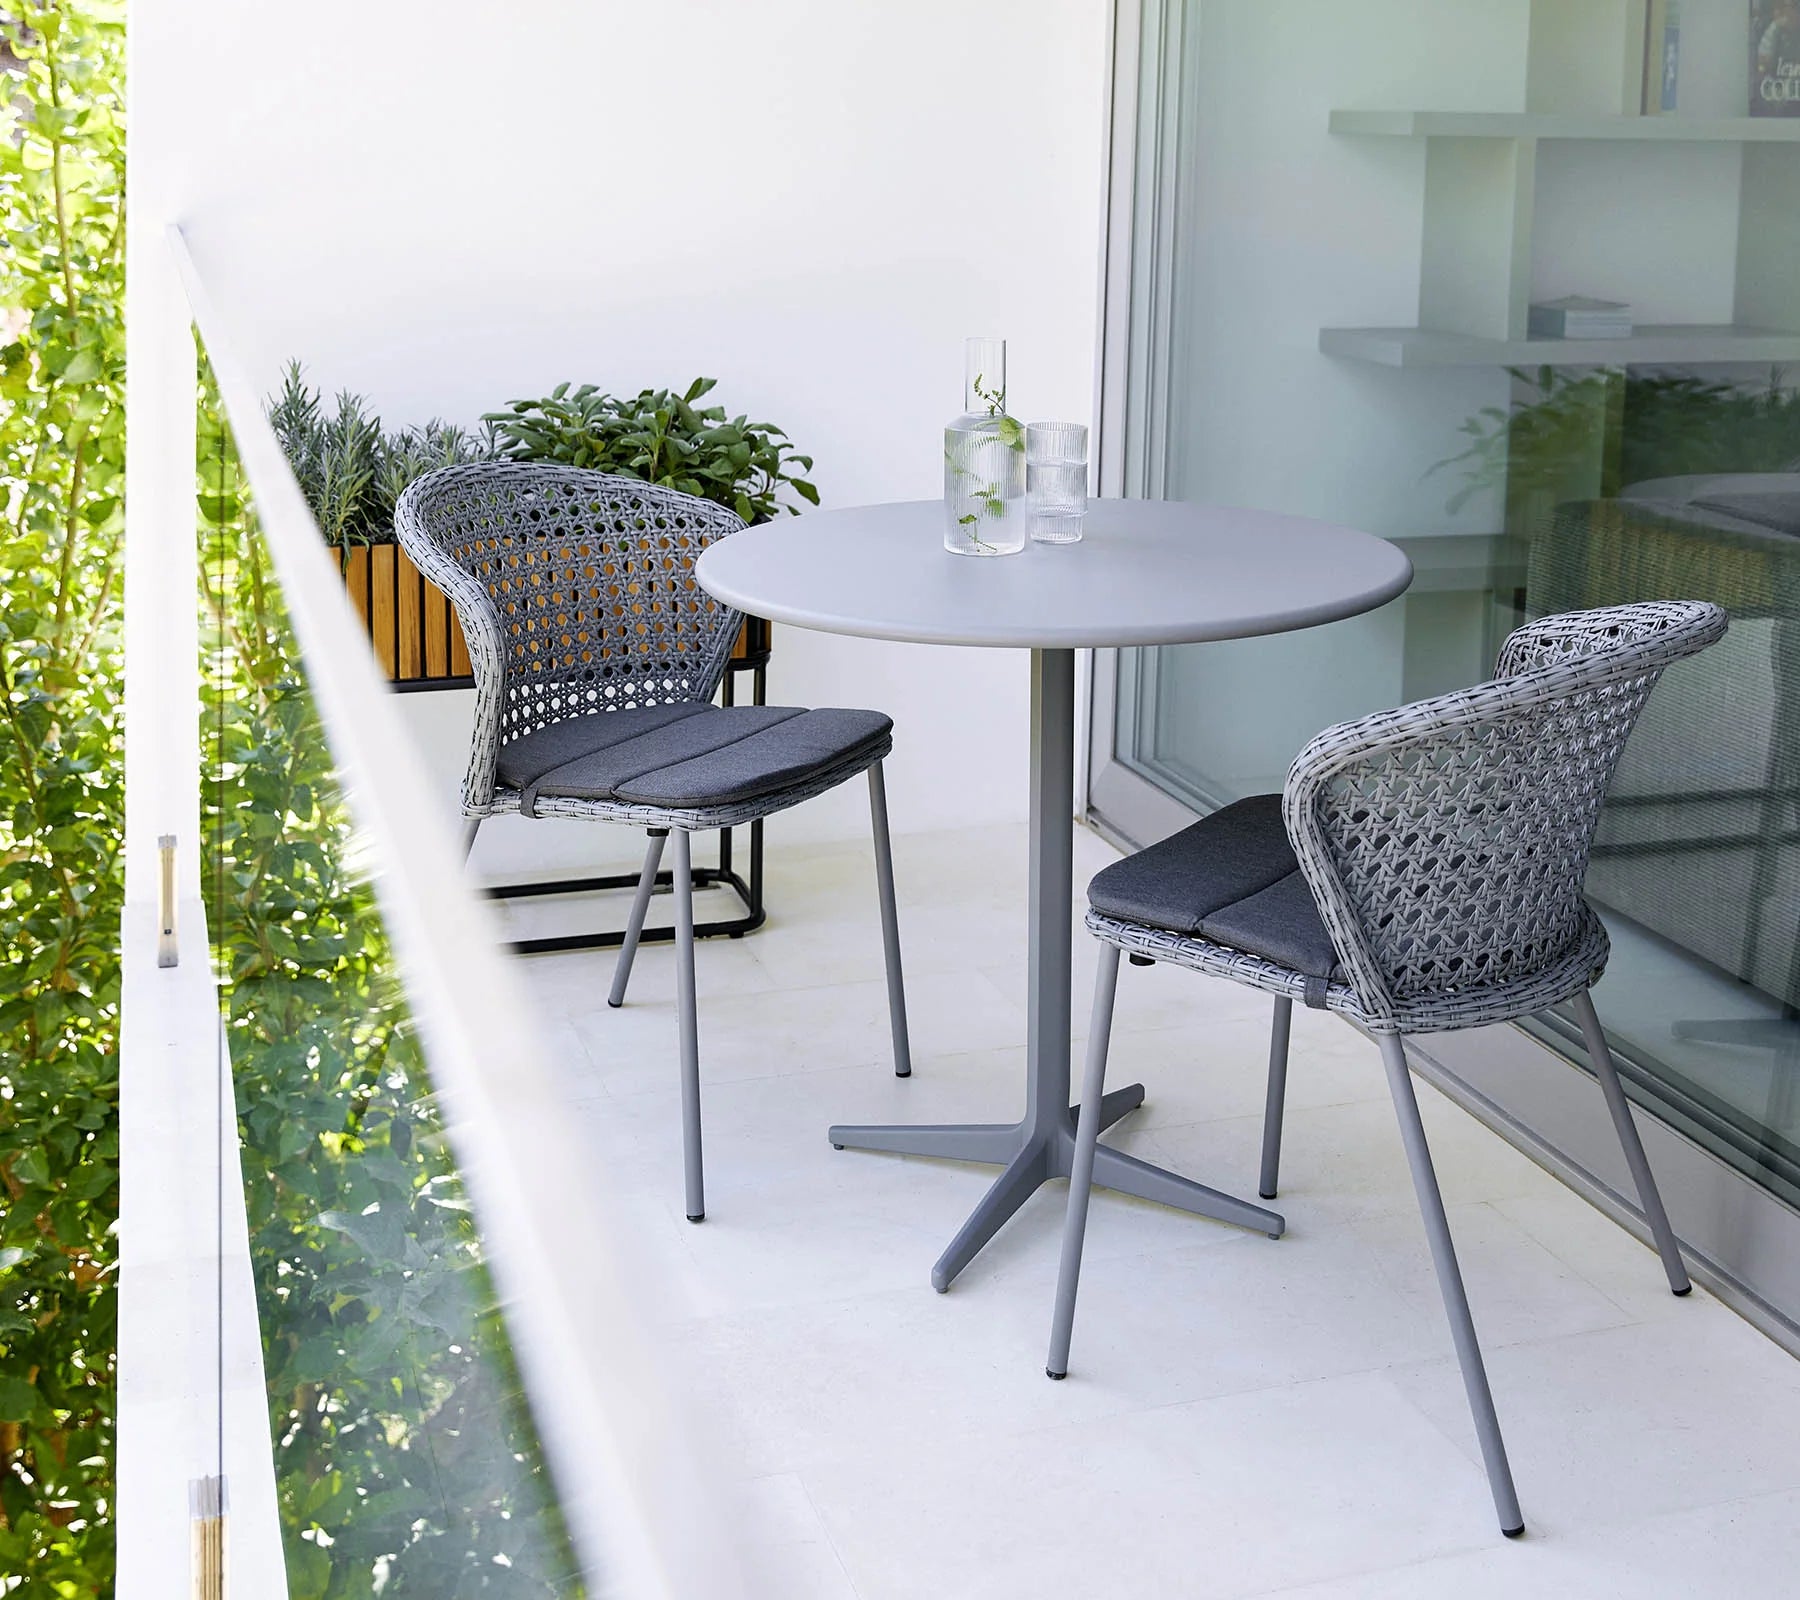 Boxhill's Lean Stackable Outdoor Garden Chair French Weave lifestyle image on balcony with round table and 2 glasses of water and a bottle container on top